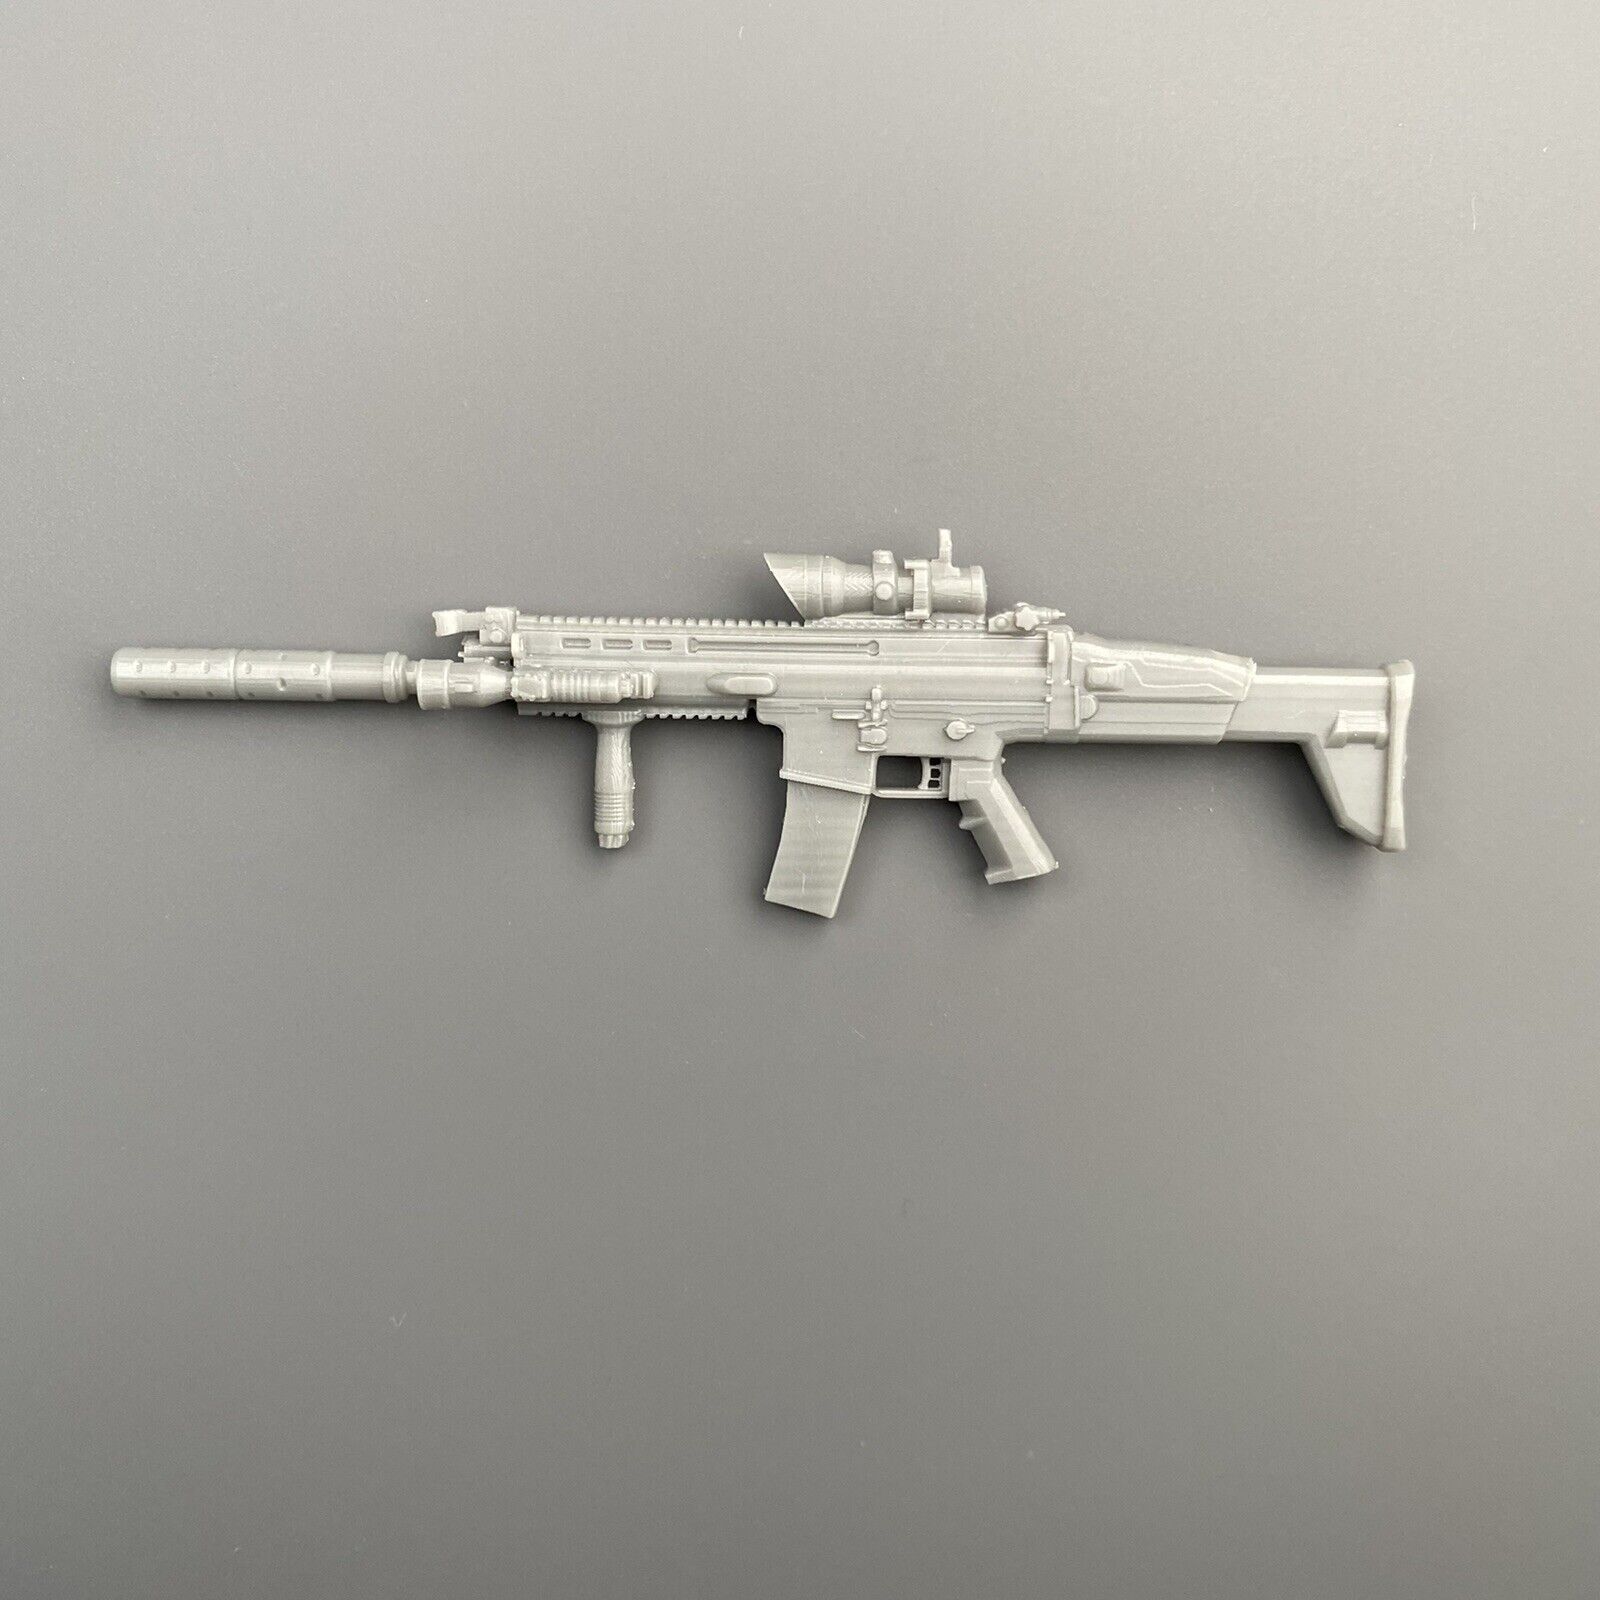 SCAR-L Suppressed Rifle 1/12 Scale 3D Printed - Unpainted Resin Print | eBay